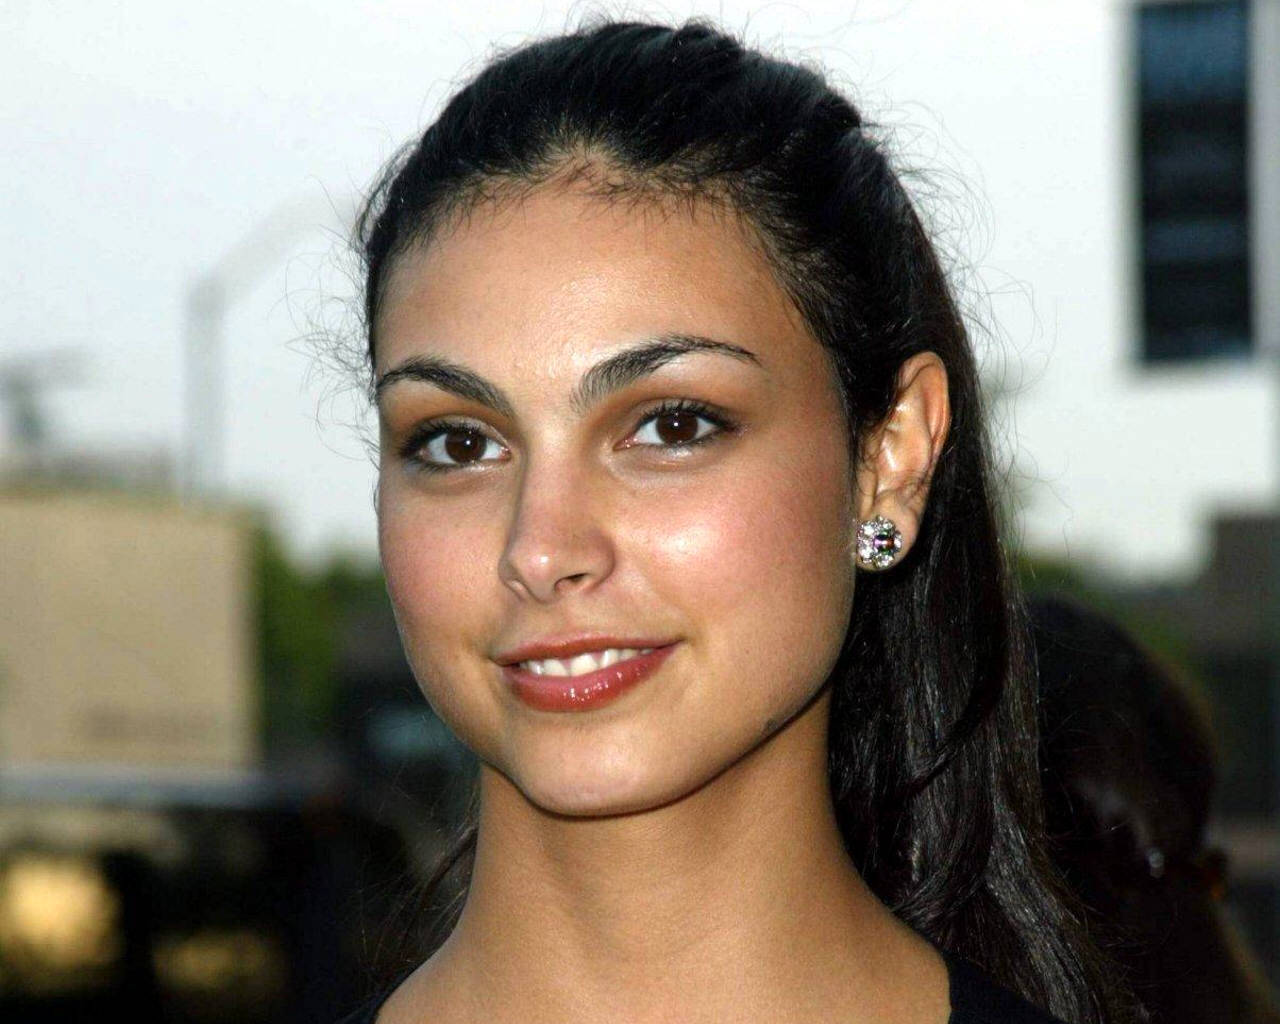 Download full size Morena Baccarin wallpaper / Celebrities Female / 1280x1024